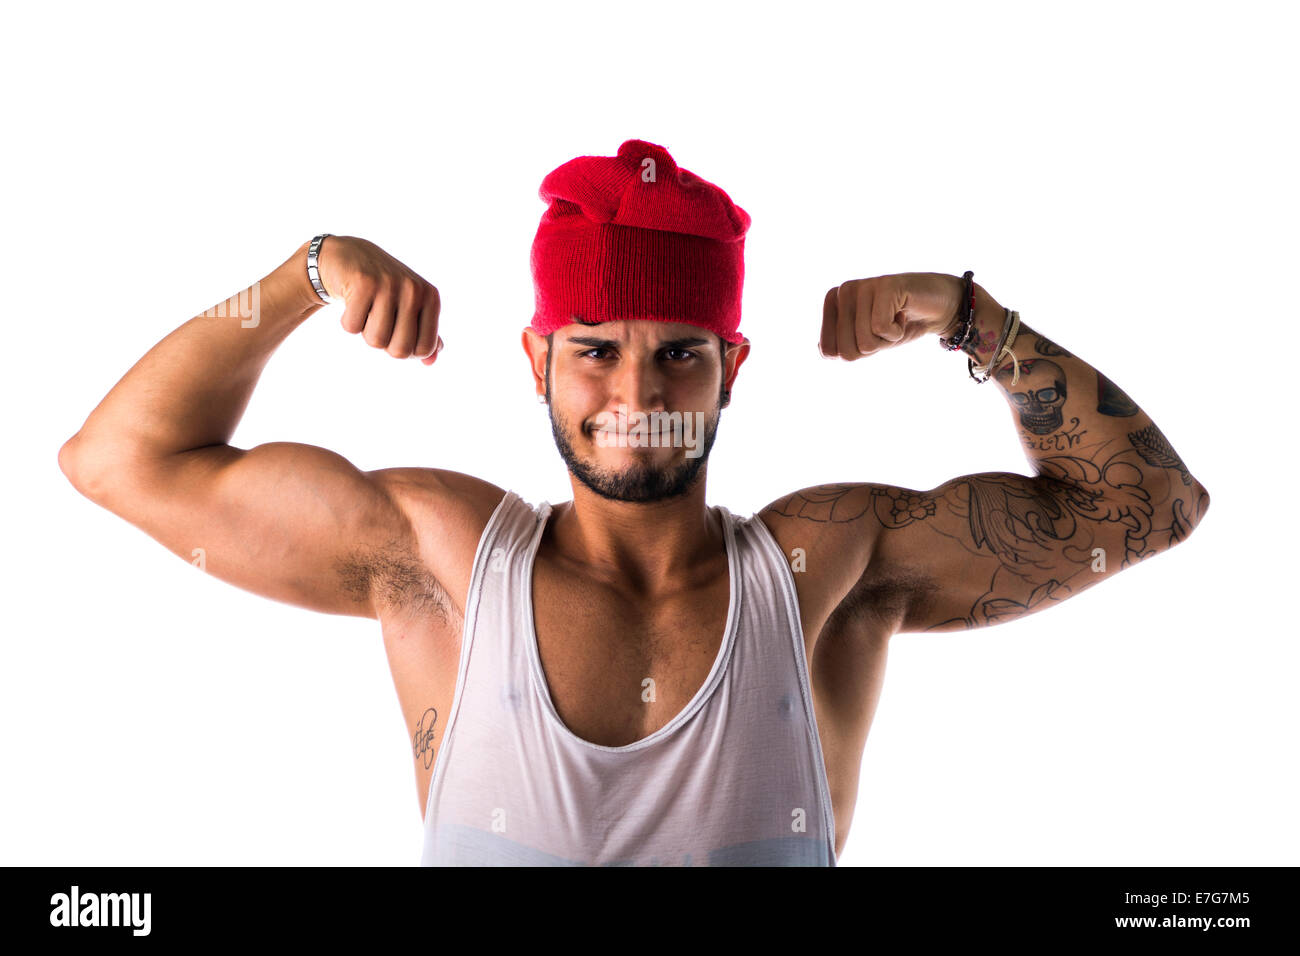 Portrait of handsome young man in funny red hat doing silly expression flexing biceps,  isolated on white Stock Photo